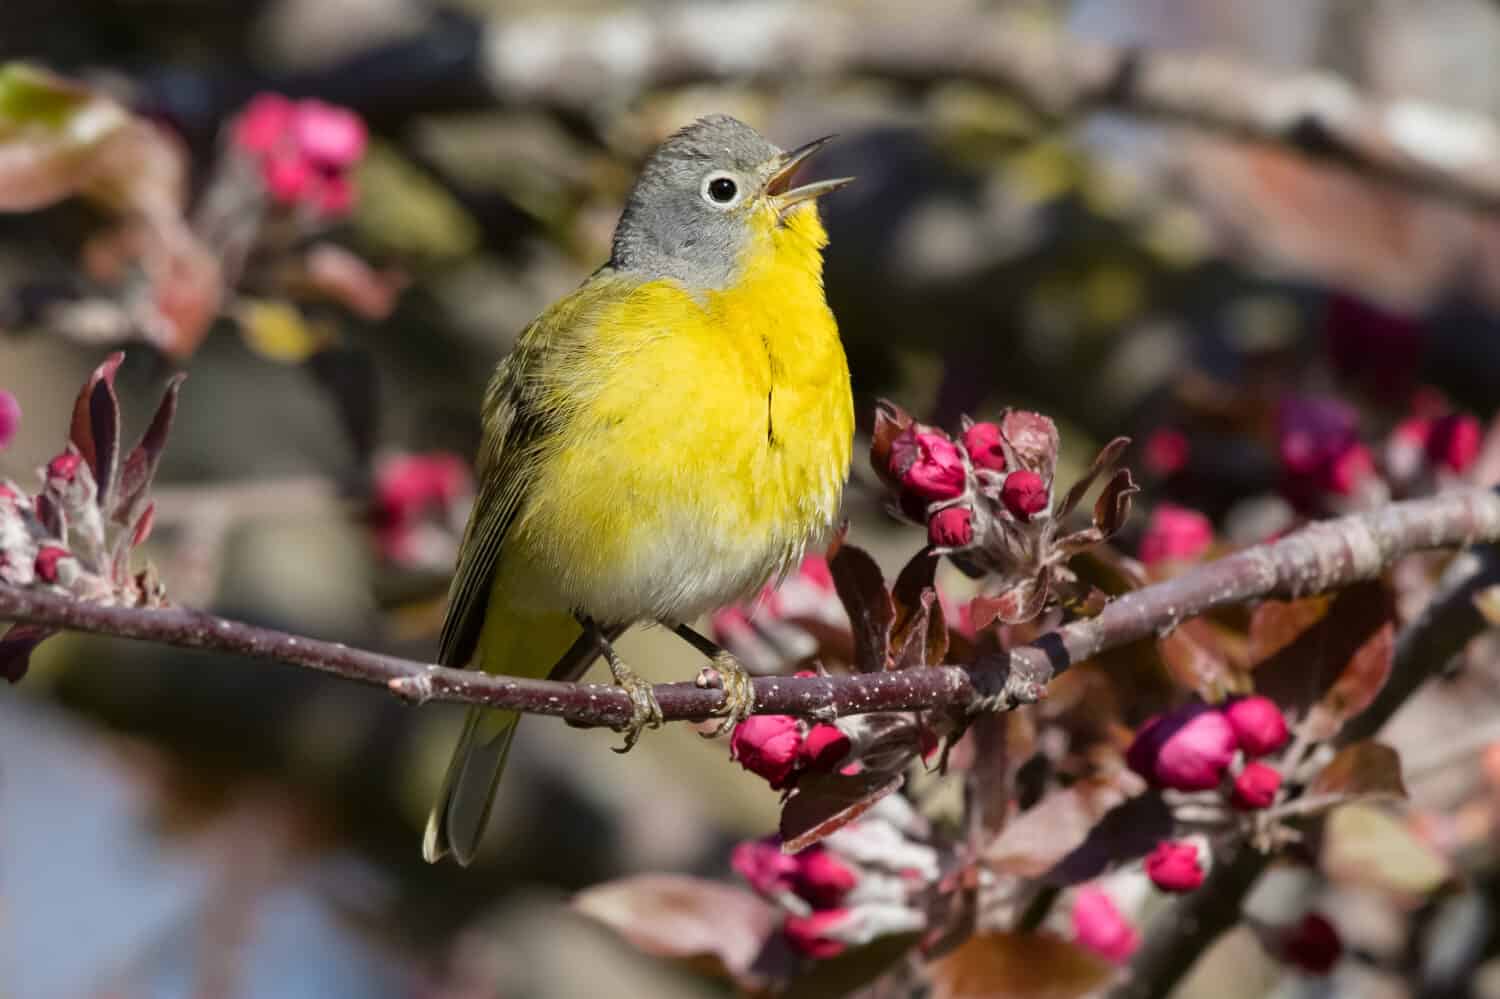 A male Nashville Warbler is singing from his perch on a branch with beautiful flowers. Ashbridges Bay Park, Toronto, Ontario, Canada.